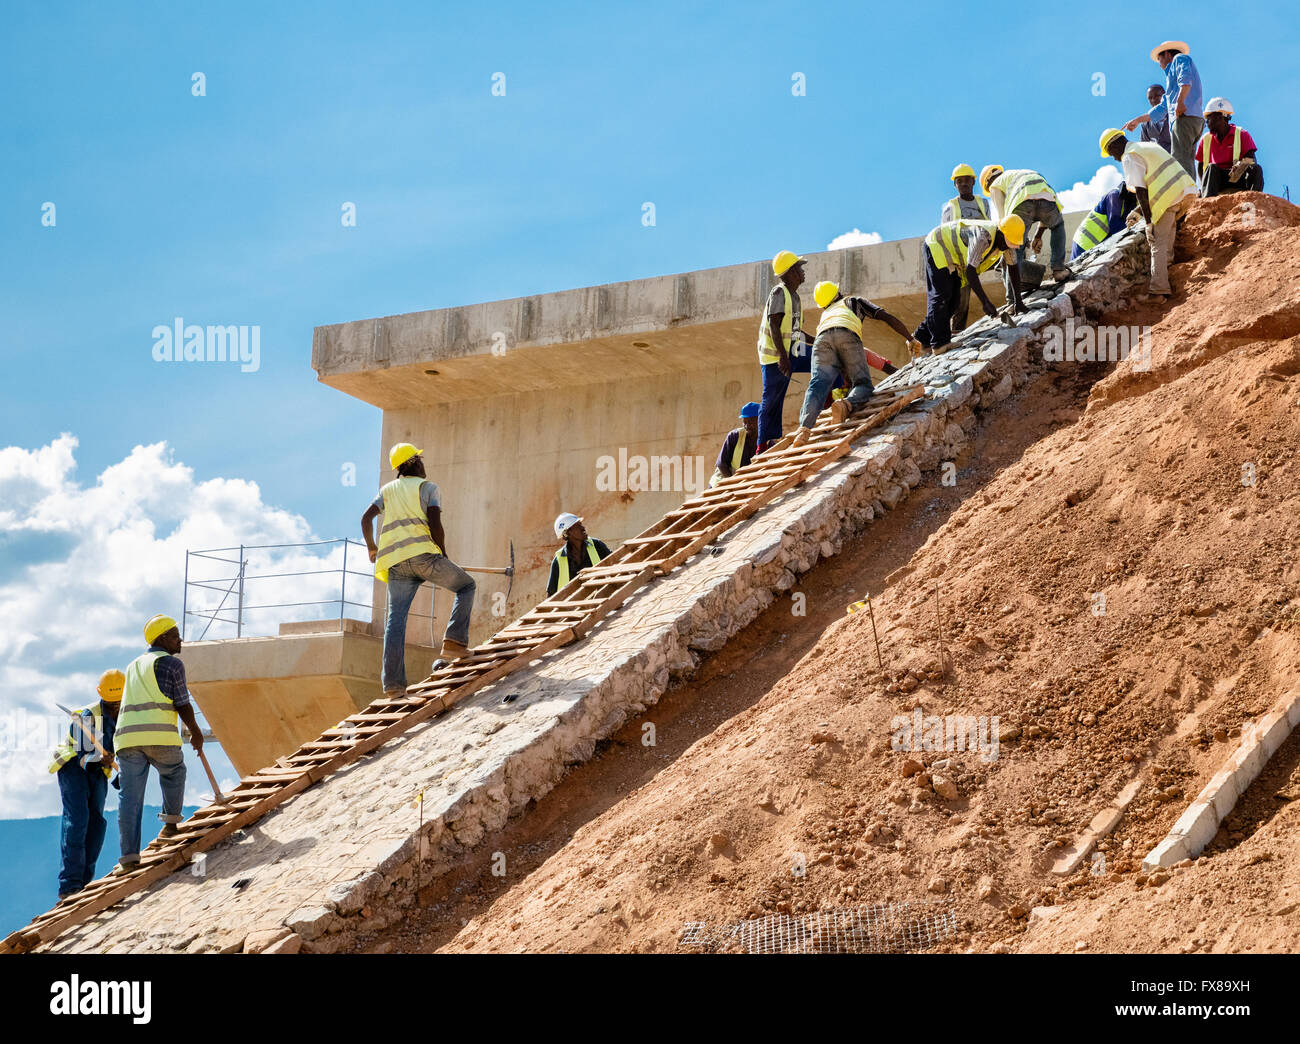 Men working on the embankments of the Nairobi to Mombasa section of the China funded Standard Gauge Railway Project in Kenya Stock Photo